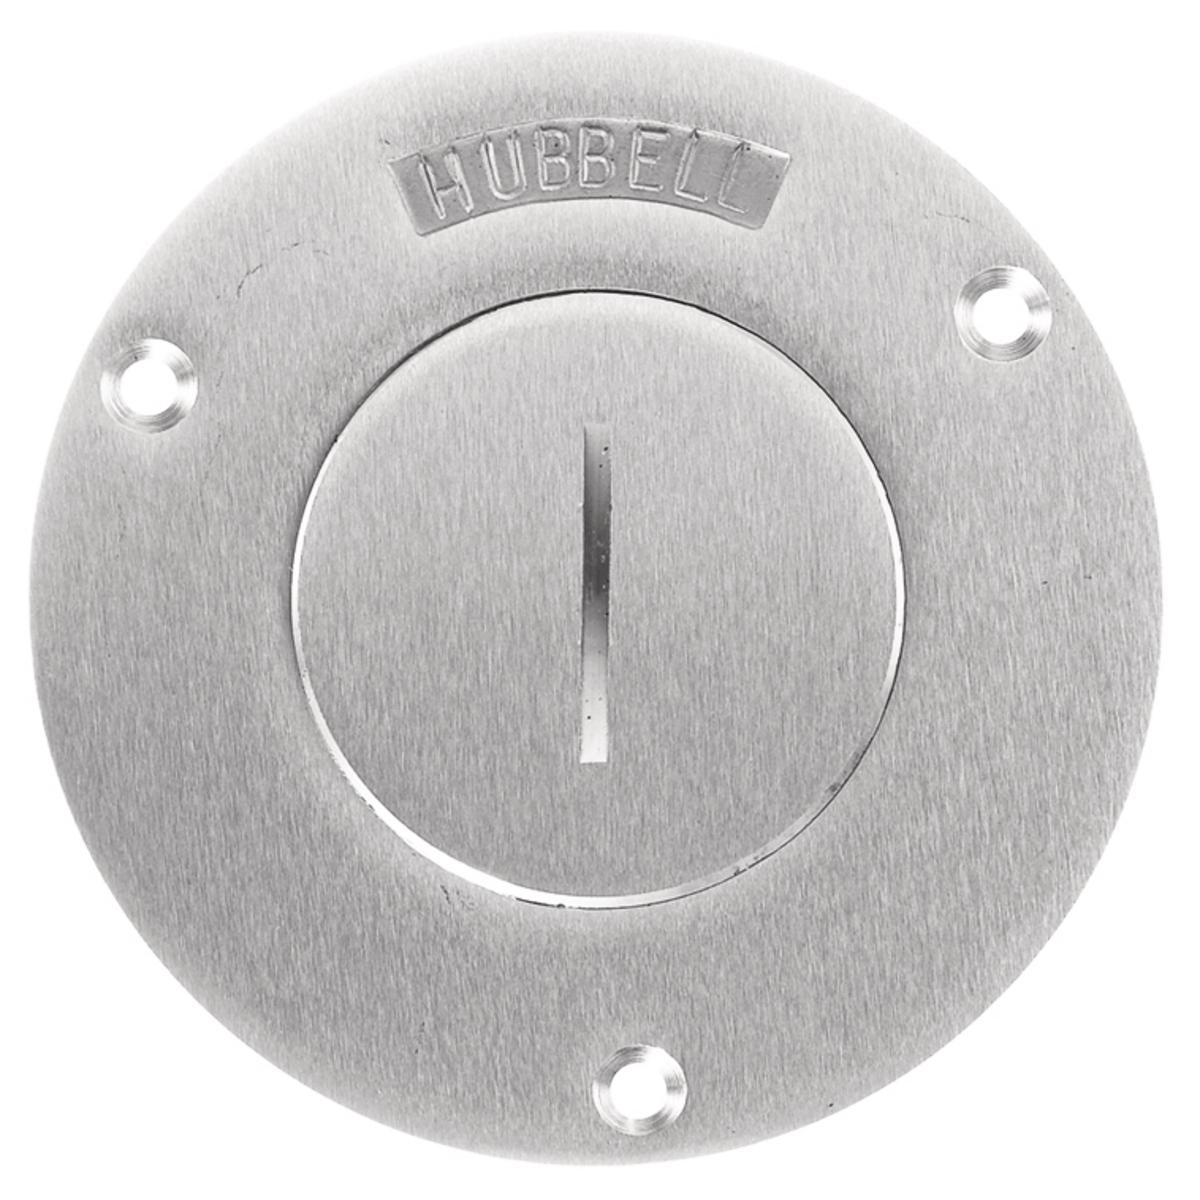 Hubbell SA2925 Flush Concrete Floor Box Series, 1-Gang Cover, Round, 2-1/8" Threaded Opening, Aluminum  ; Flush Round Floorbox Cover ; Single Gang ; Brushed Aluminum Finish, Mounting Hardware Included ; Standard Product